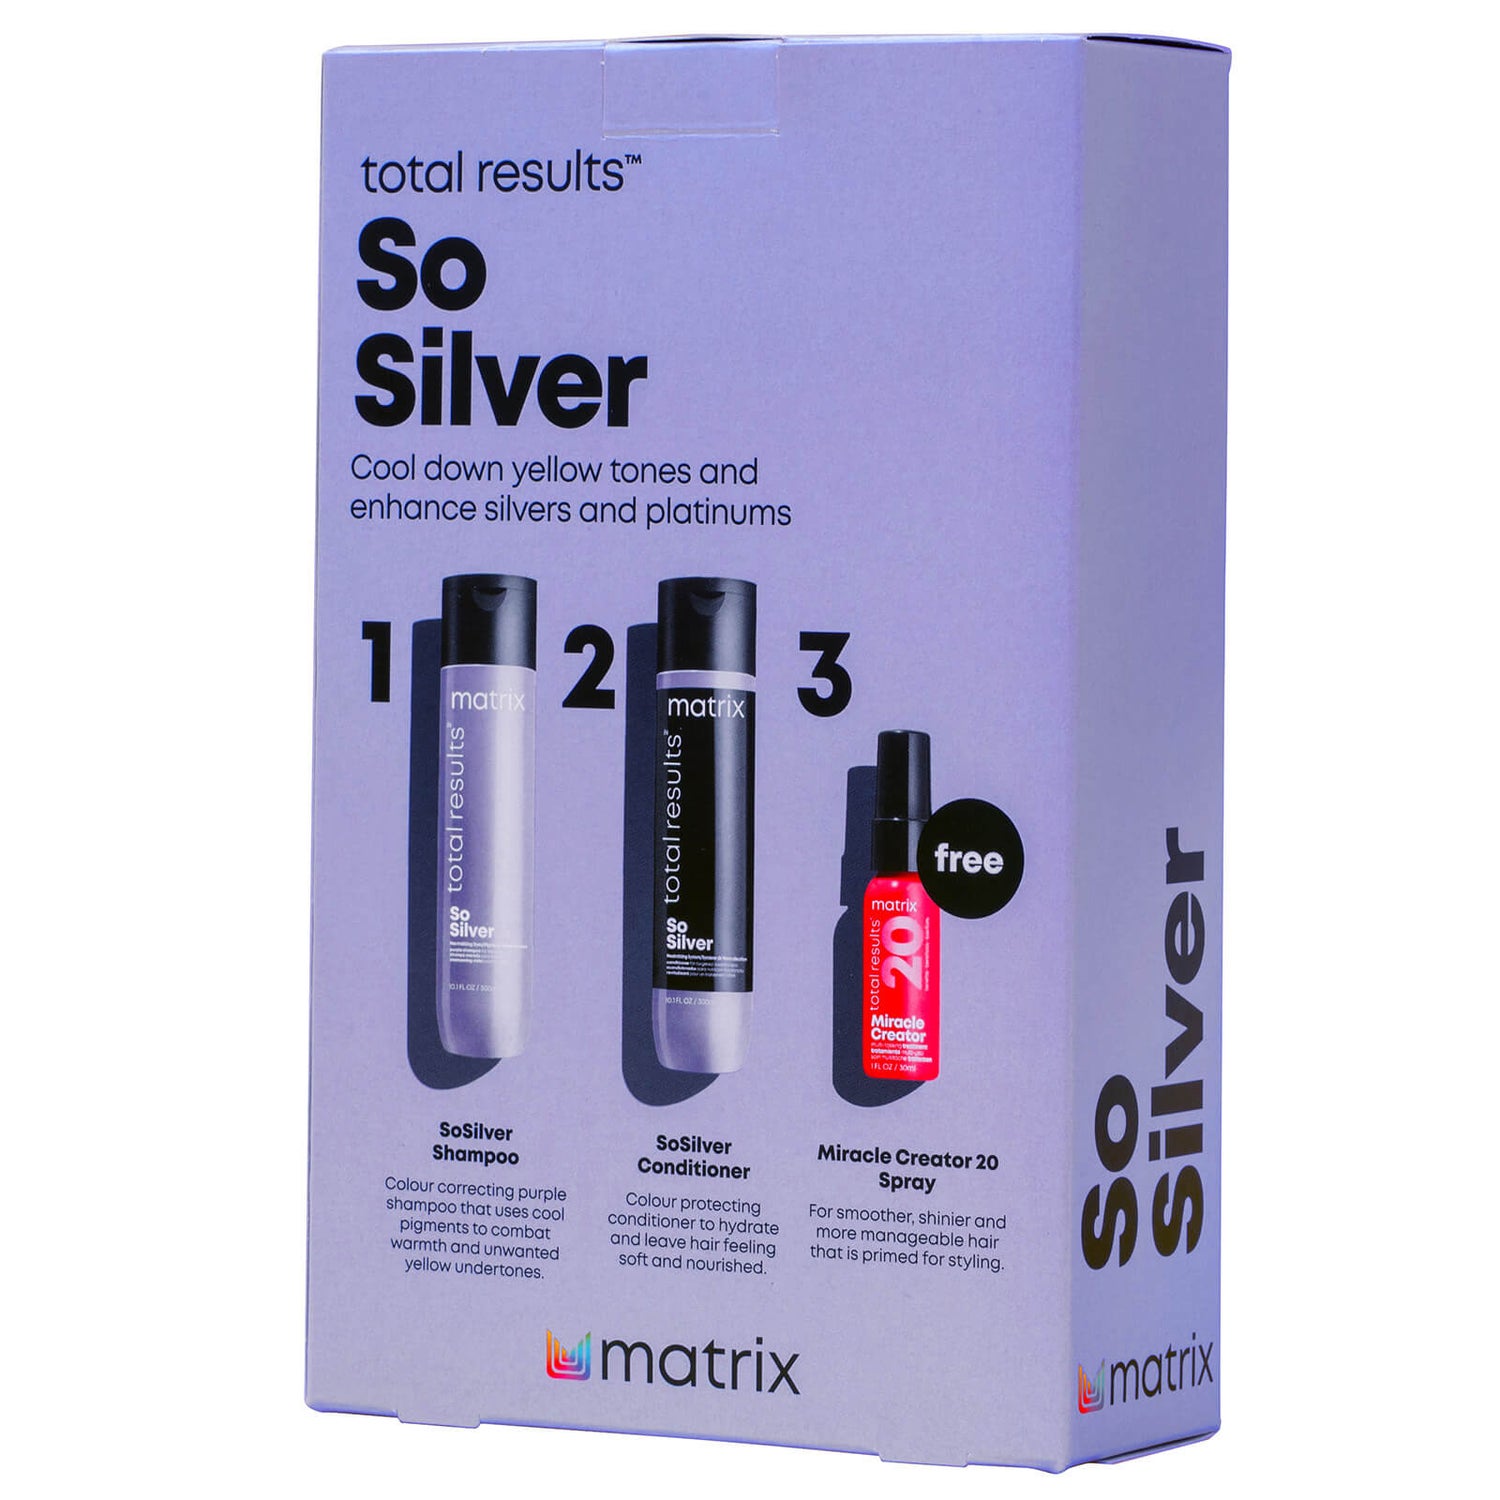 Matrix Total Results So Silver Gift Set (Worth £30.50)